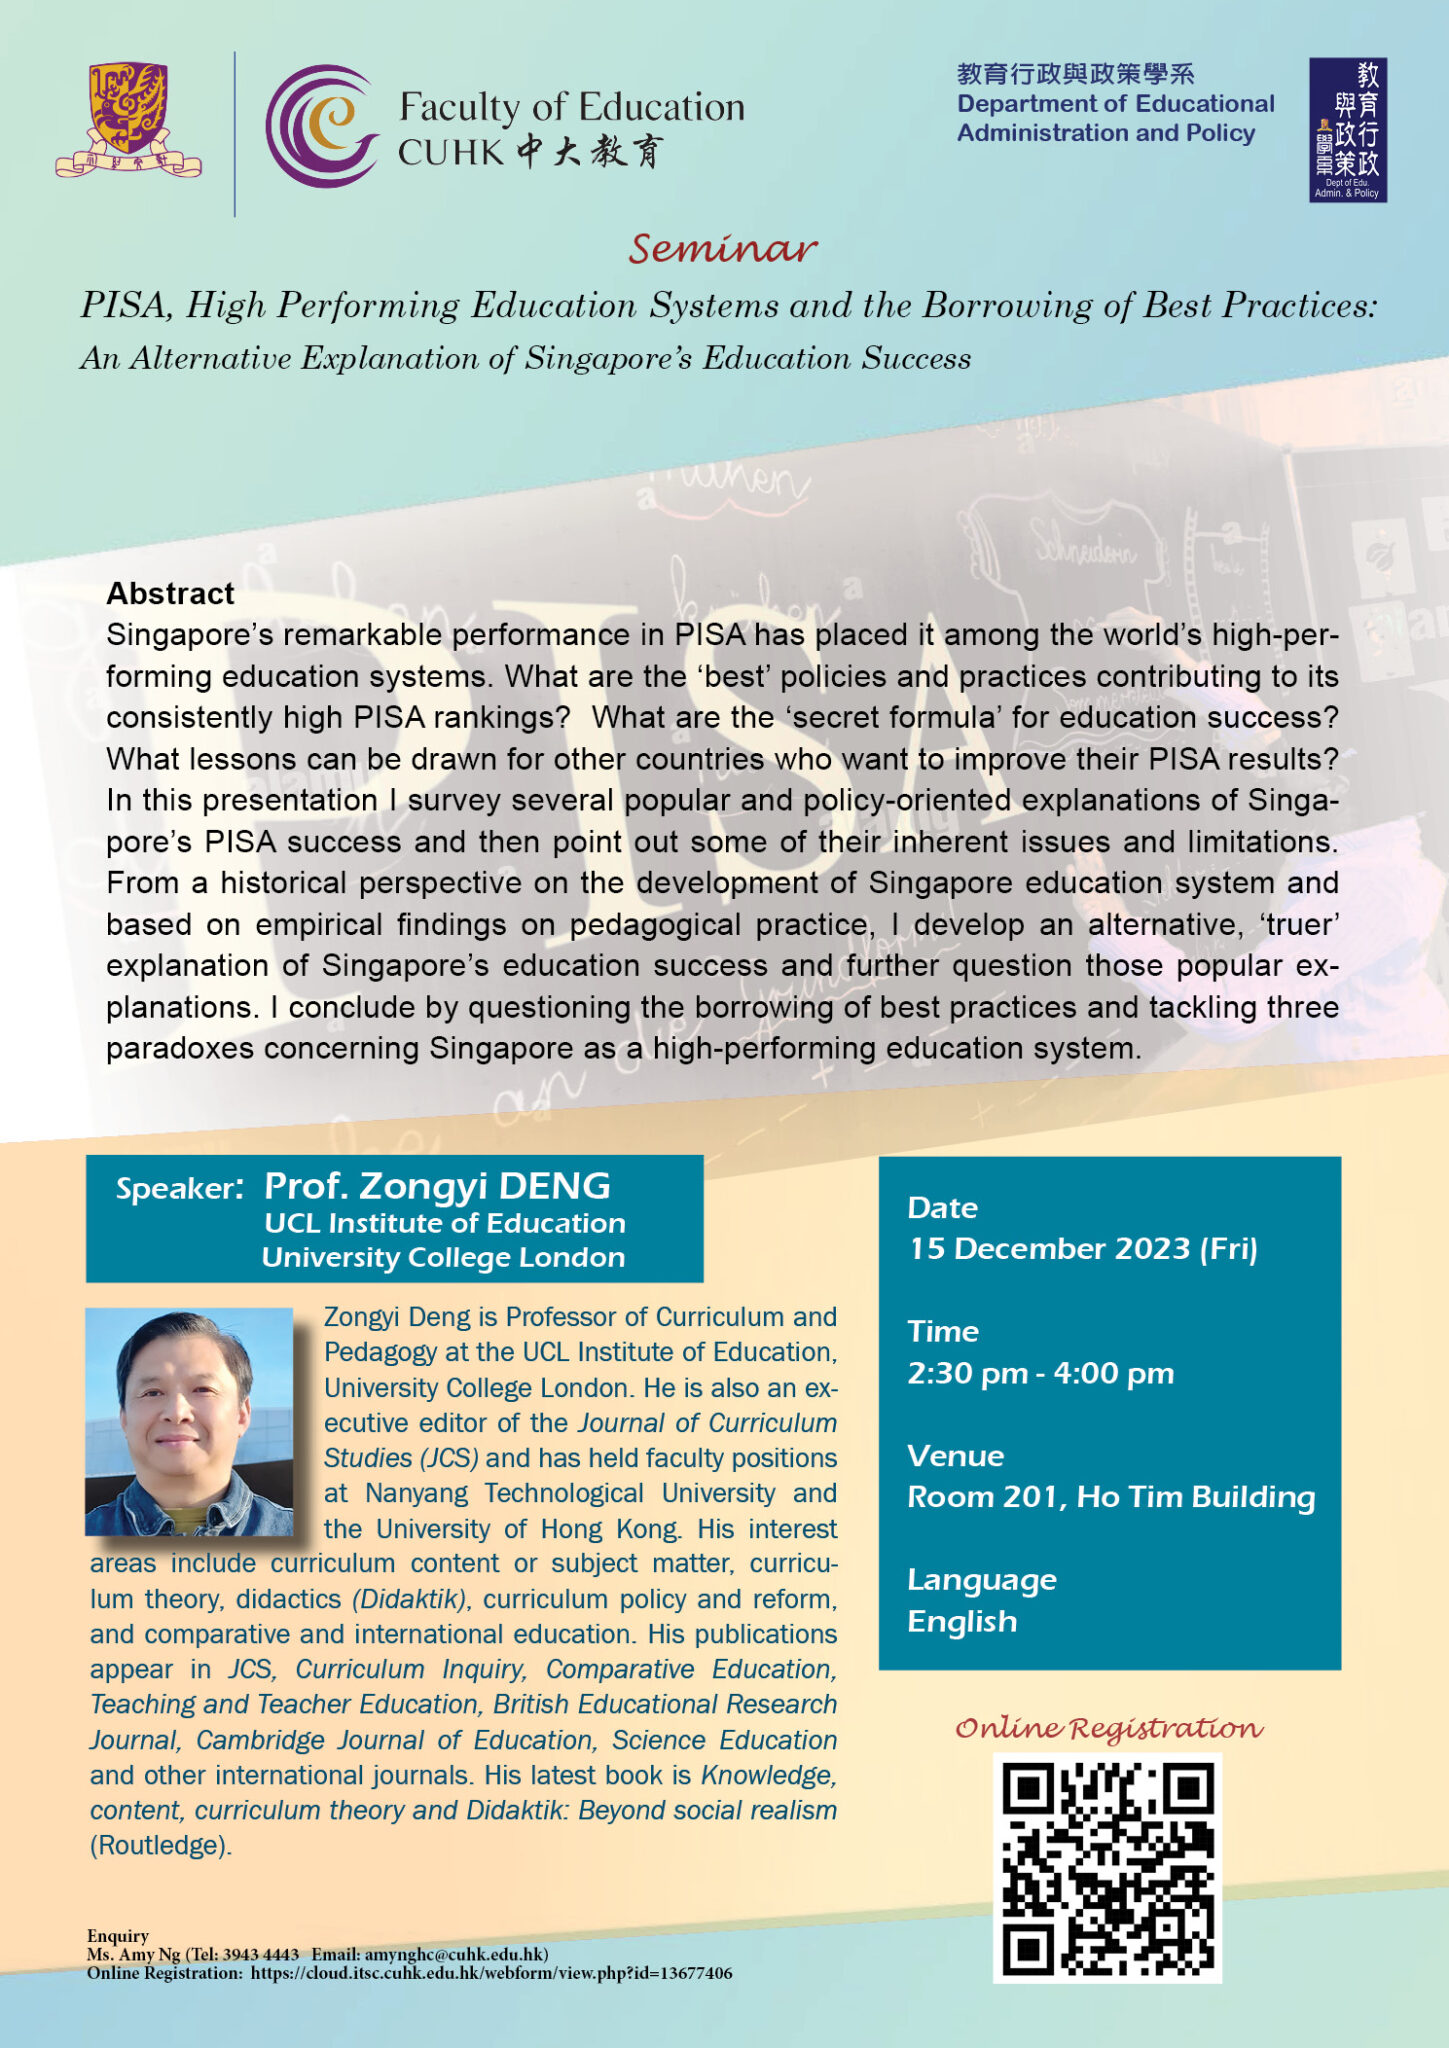 PISA, High Performing Education Systems and the Borrowing of Best Practices: An Alternative Explanation of Singapore’s Education Success